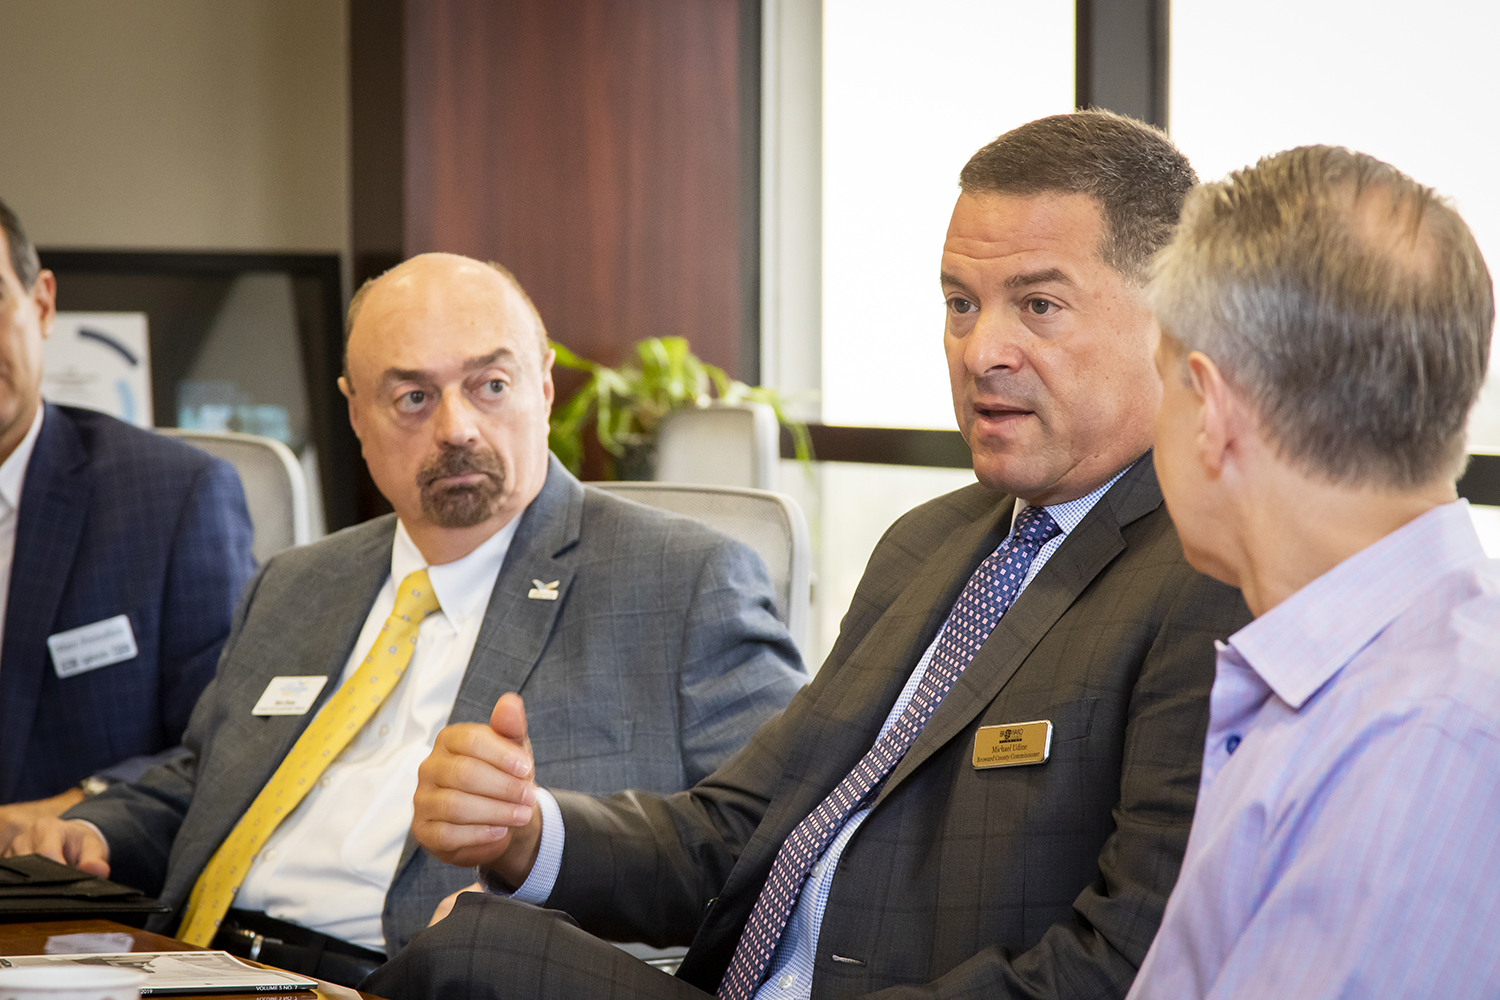 Broward County Commissioner Michael Udine, center, make a point as Ron Drew of the Alliance, left, and Will Fleming listen.